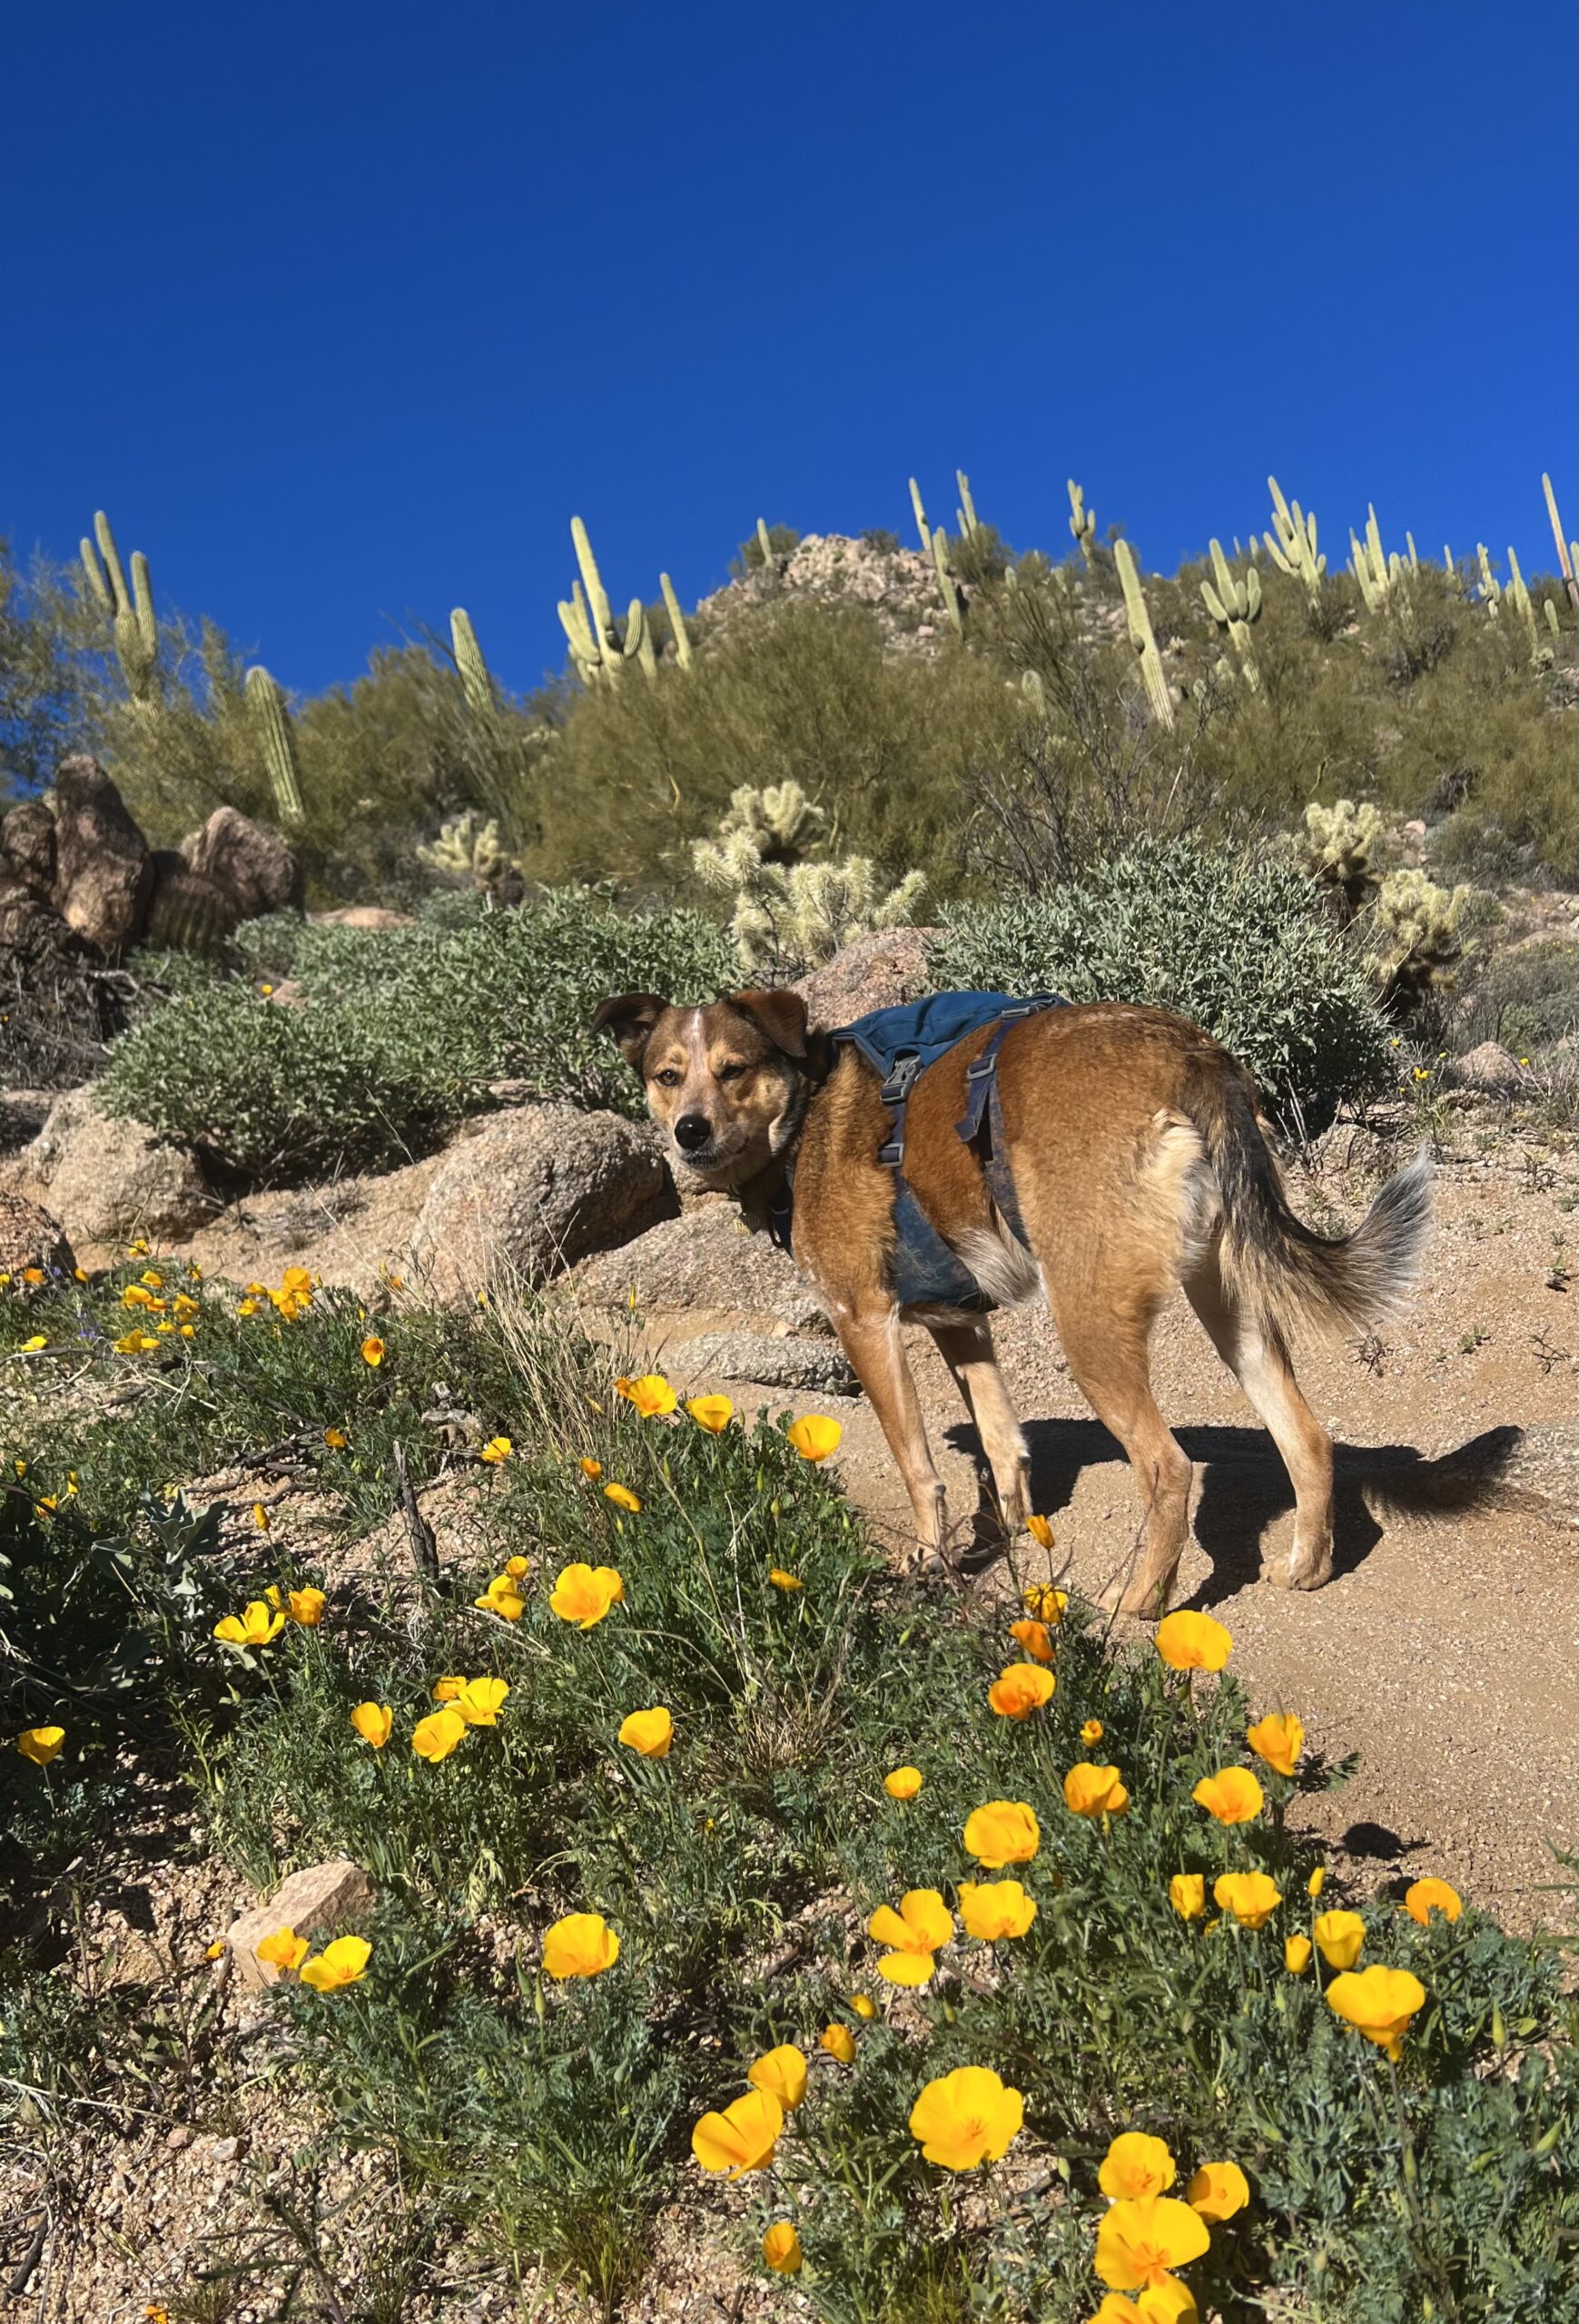 Dog in Blue Harness Standing by Orange Wildflowers